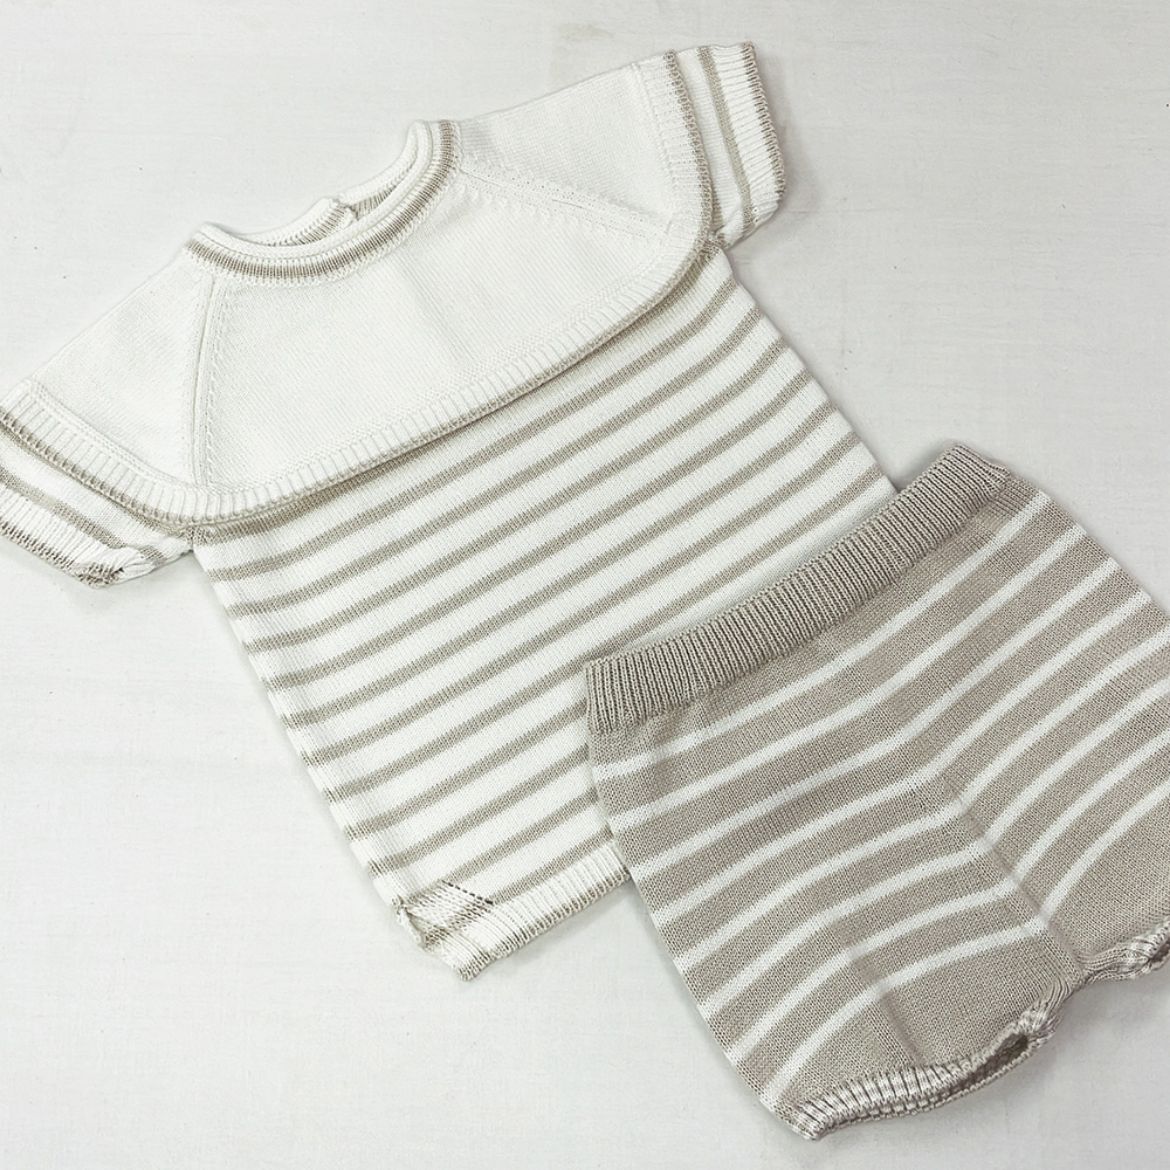 Picture of Granlei Boys Cream Stripe Knitted Set